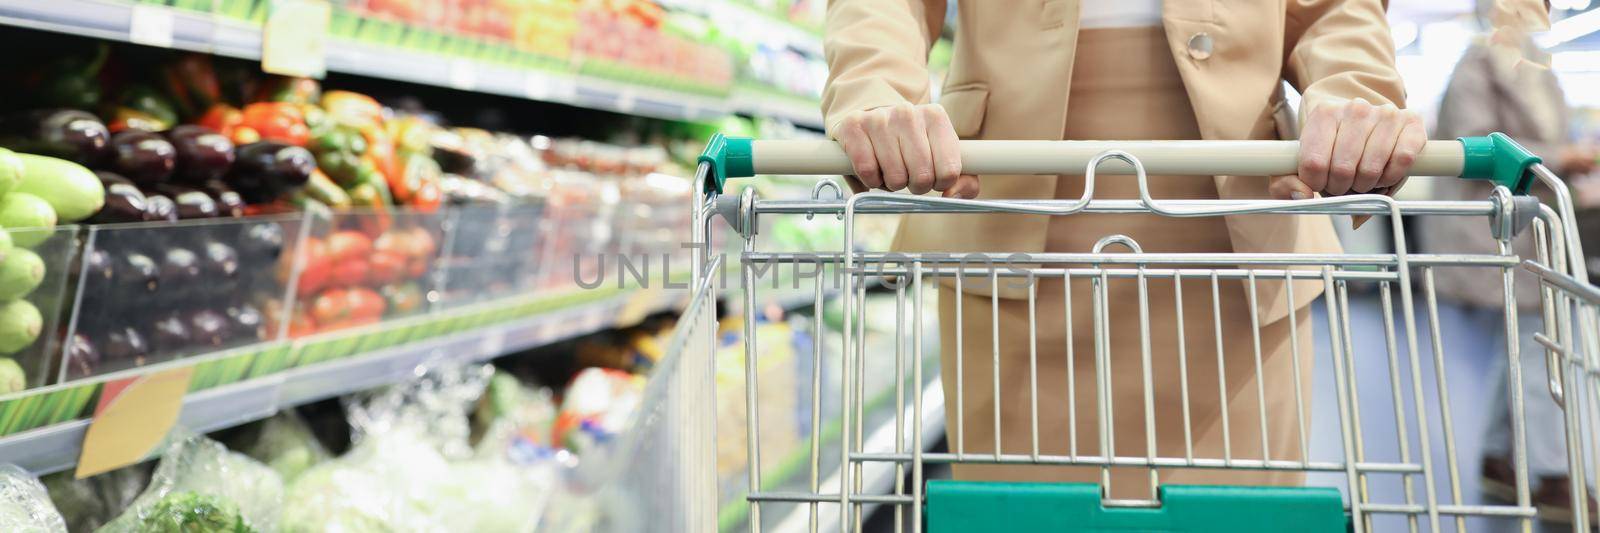 Portrait of smiling woman with shopping cart in supermarket buying groceries food walking along aisle and shelves in grocery store. Shopping, food concept